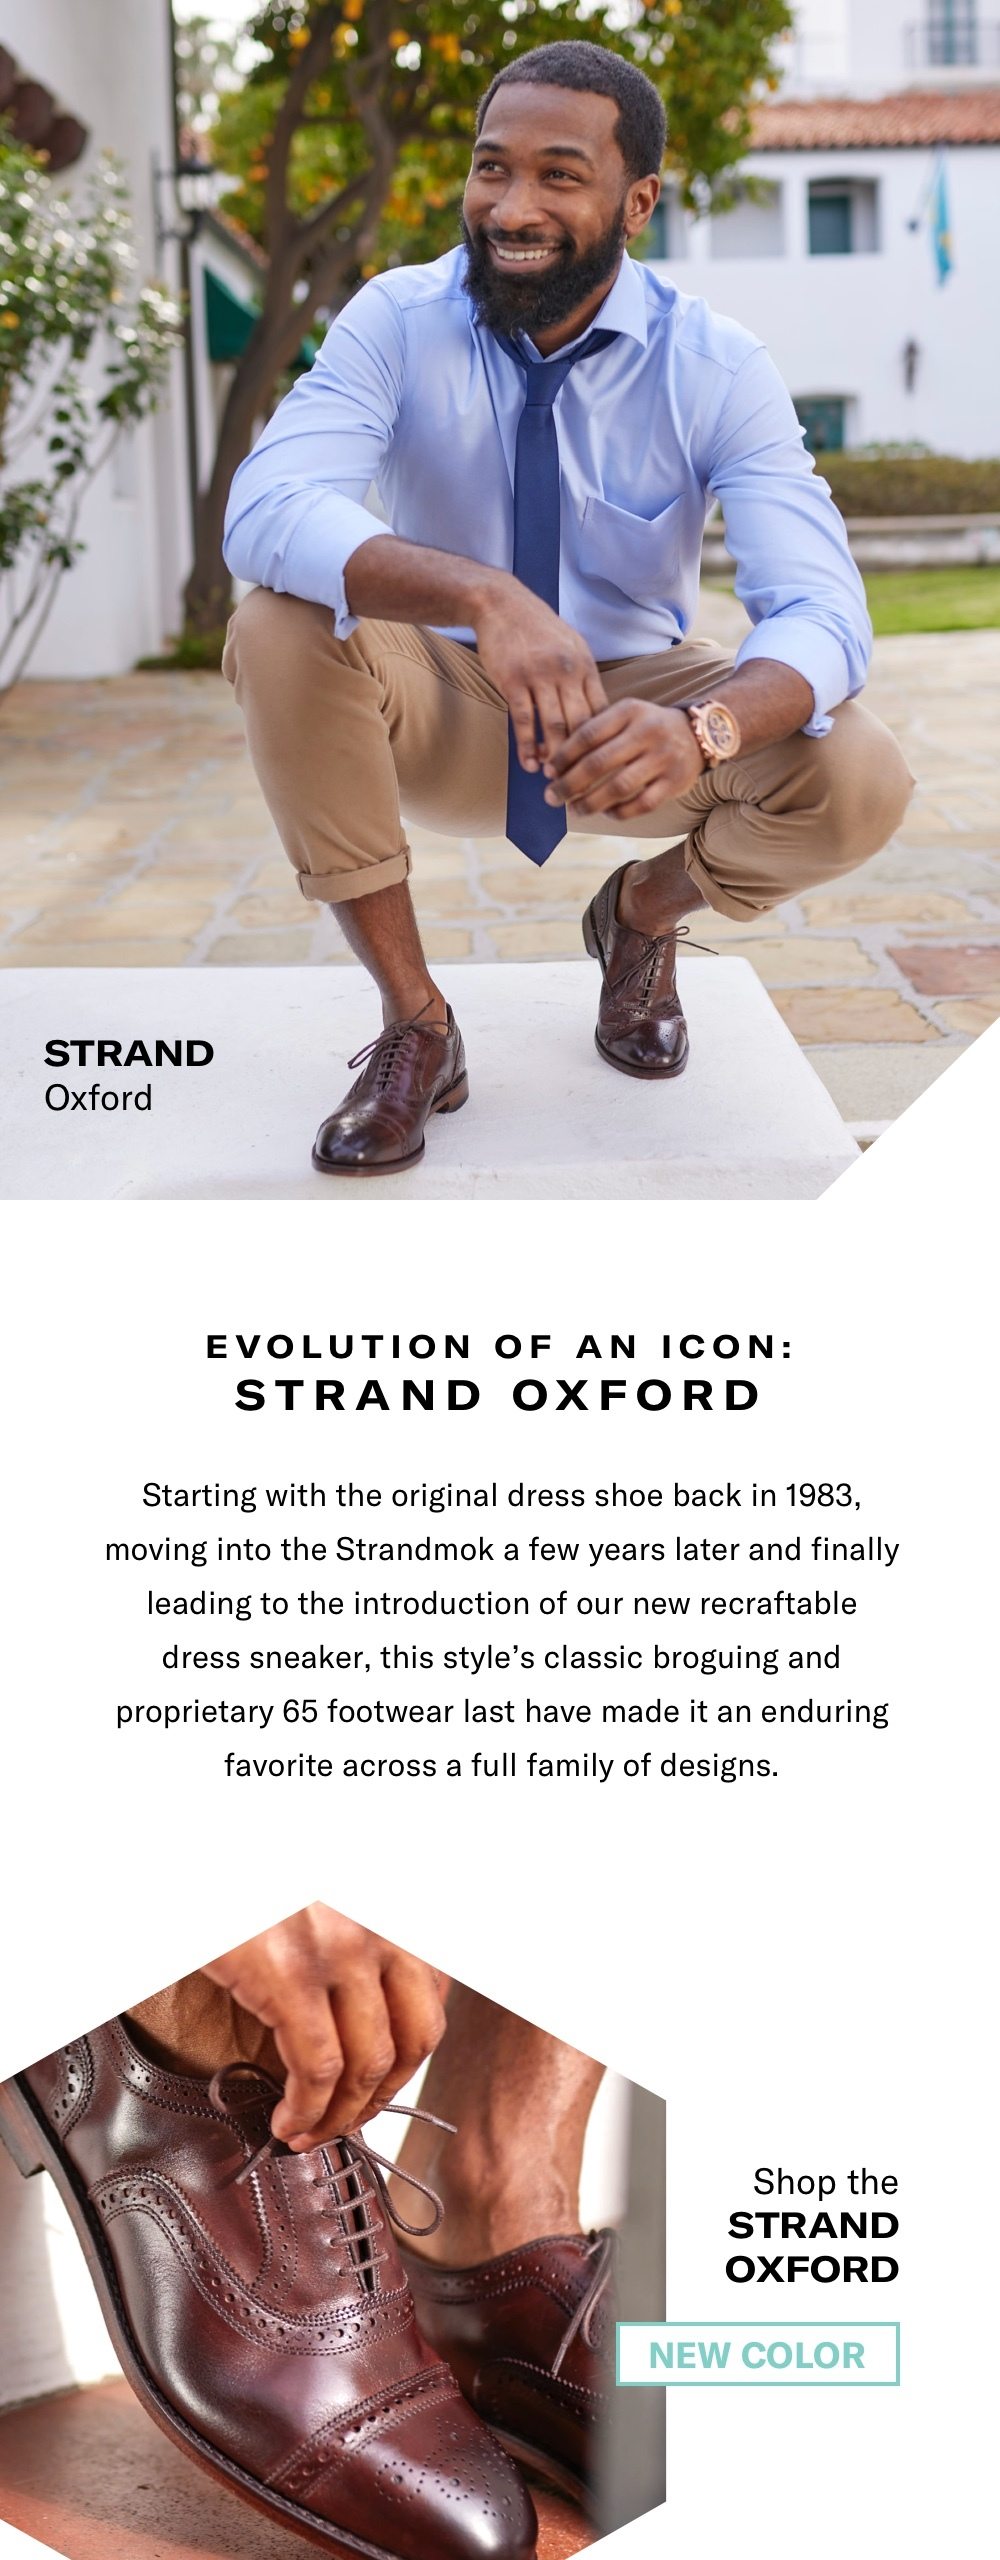 Shop the Strand - New Color